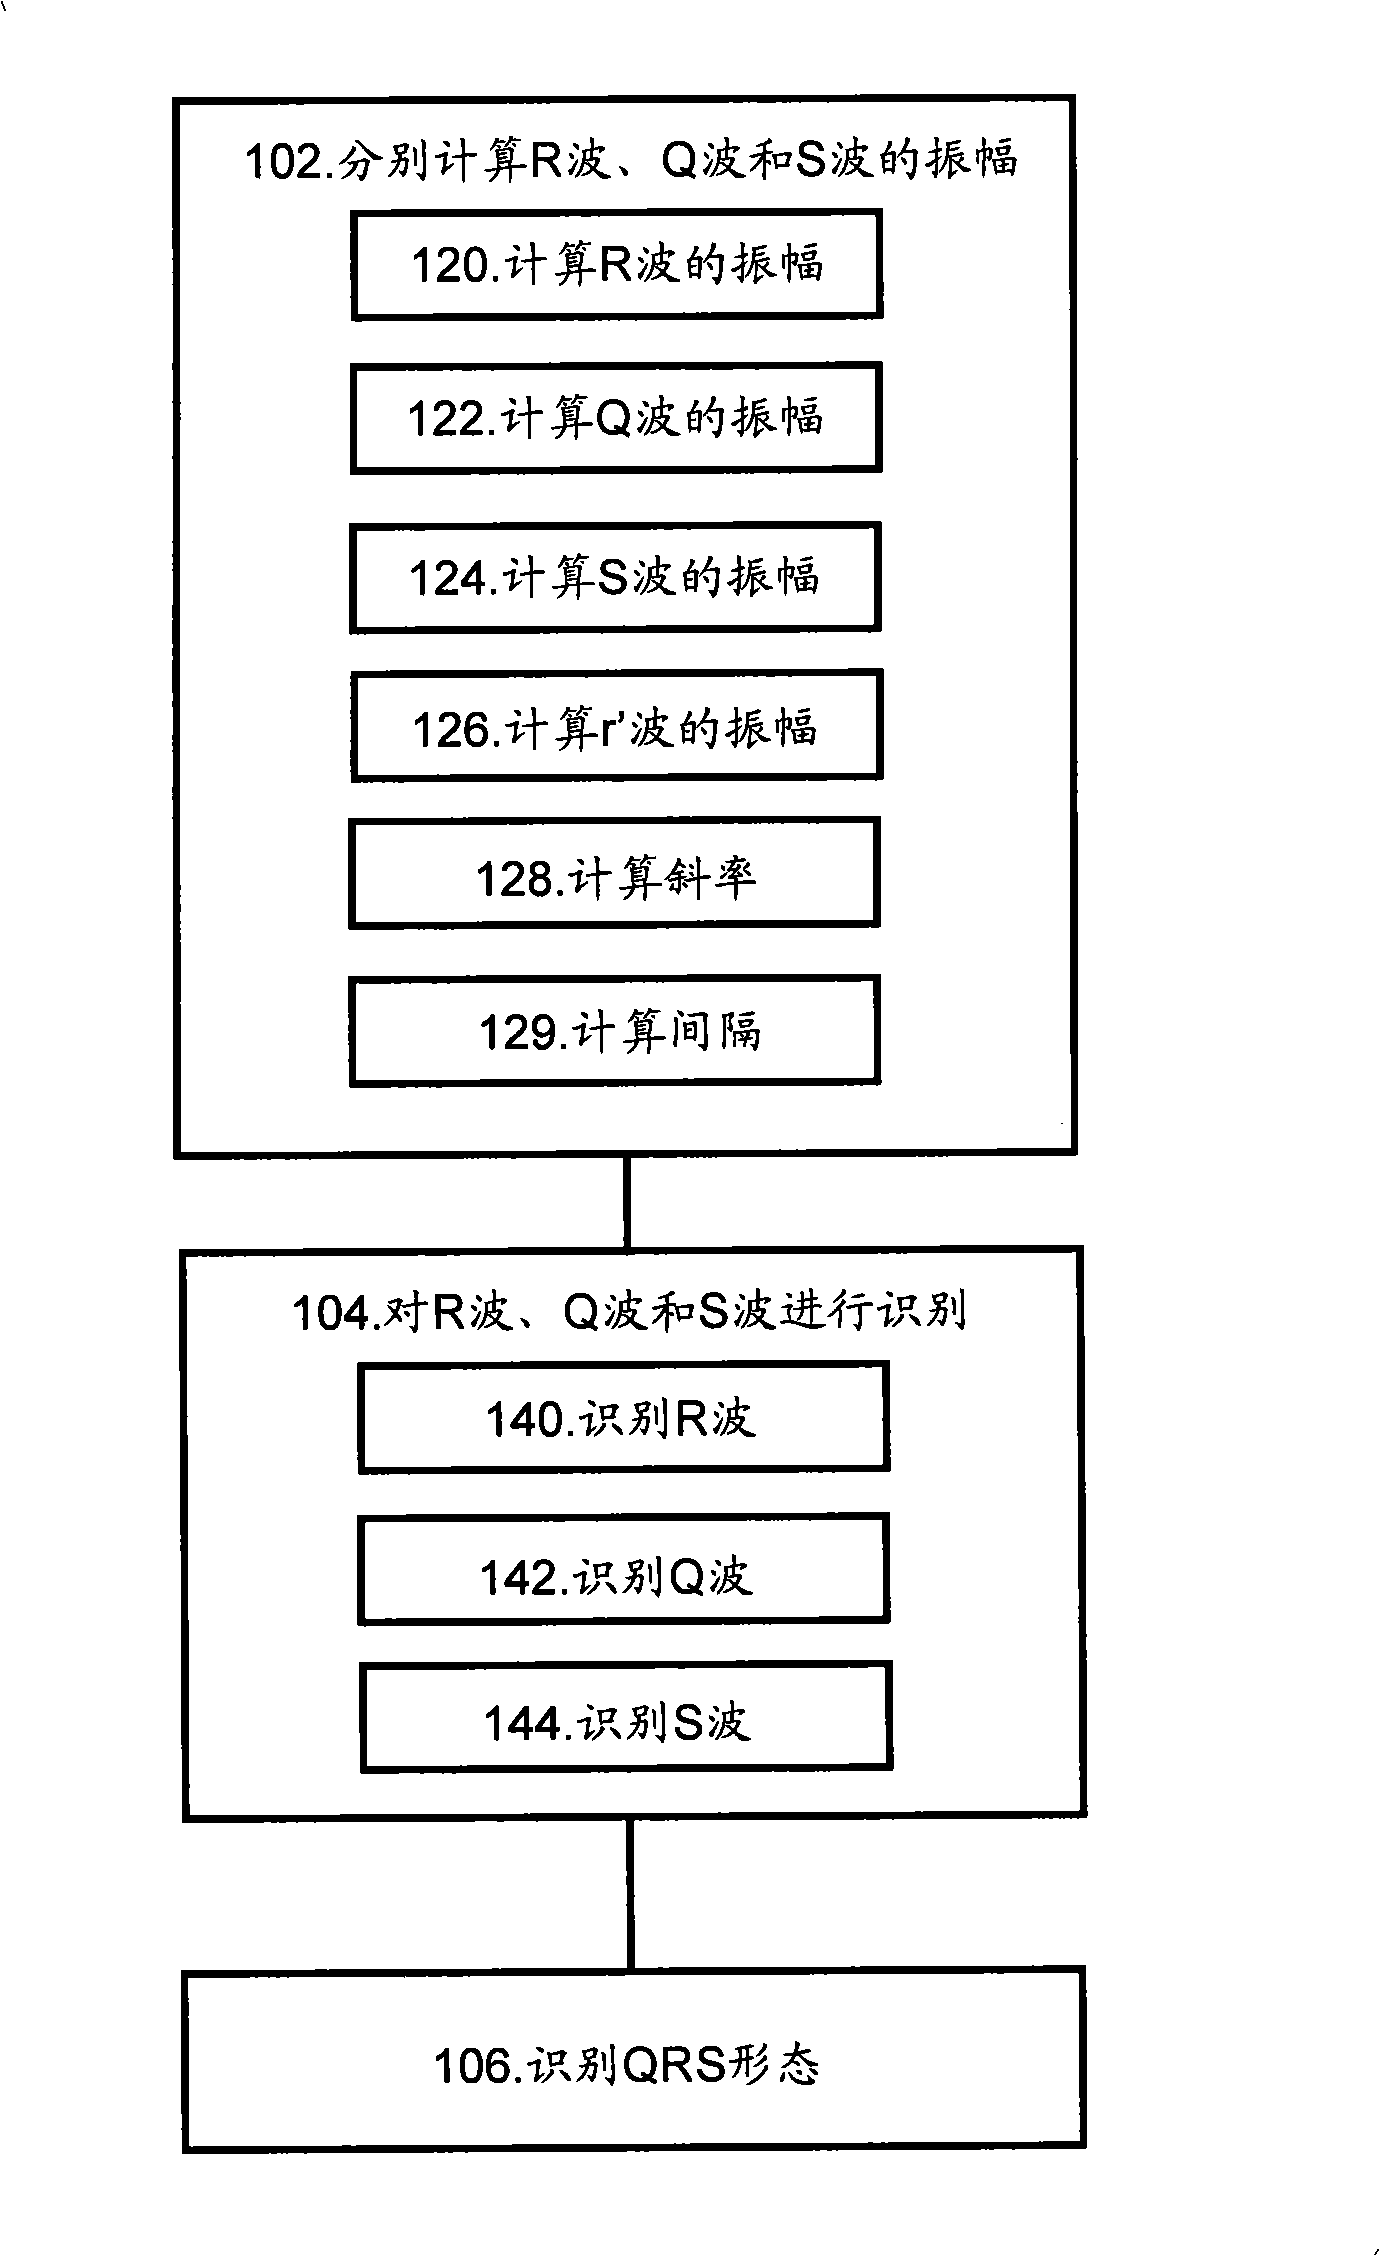 Method and apparatus for electrocardiogram recognition and specification